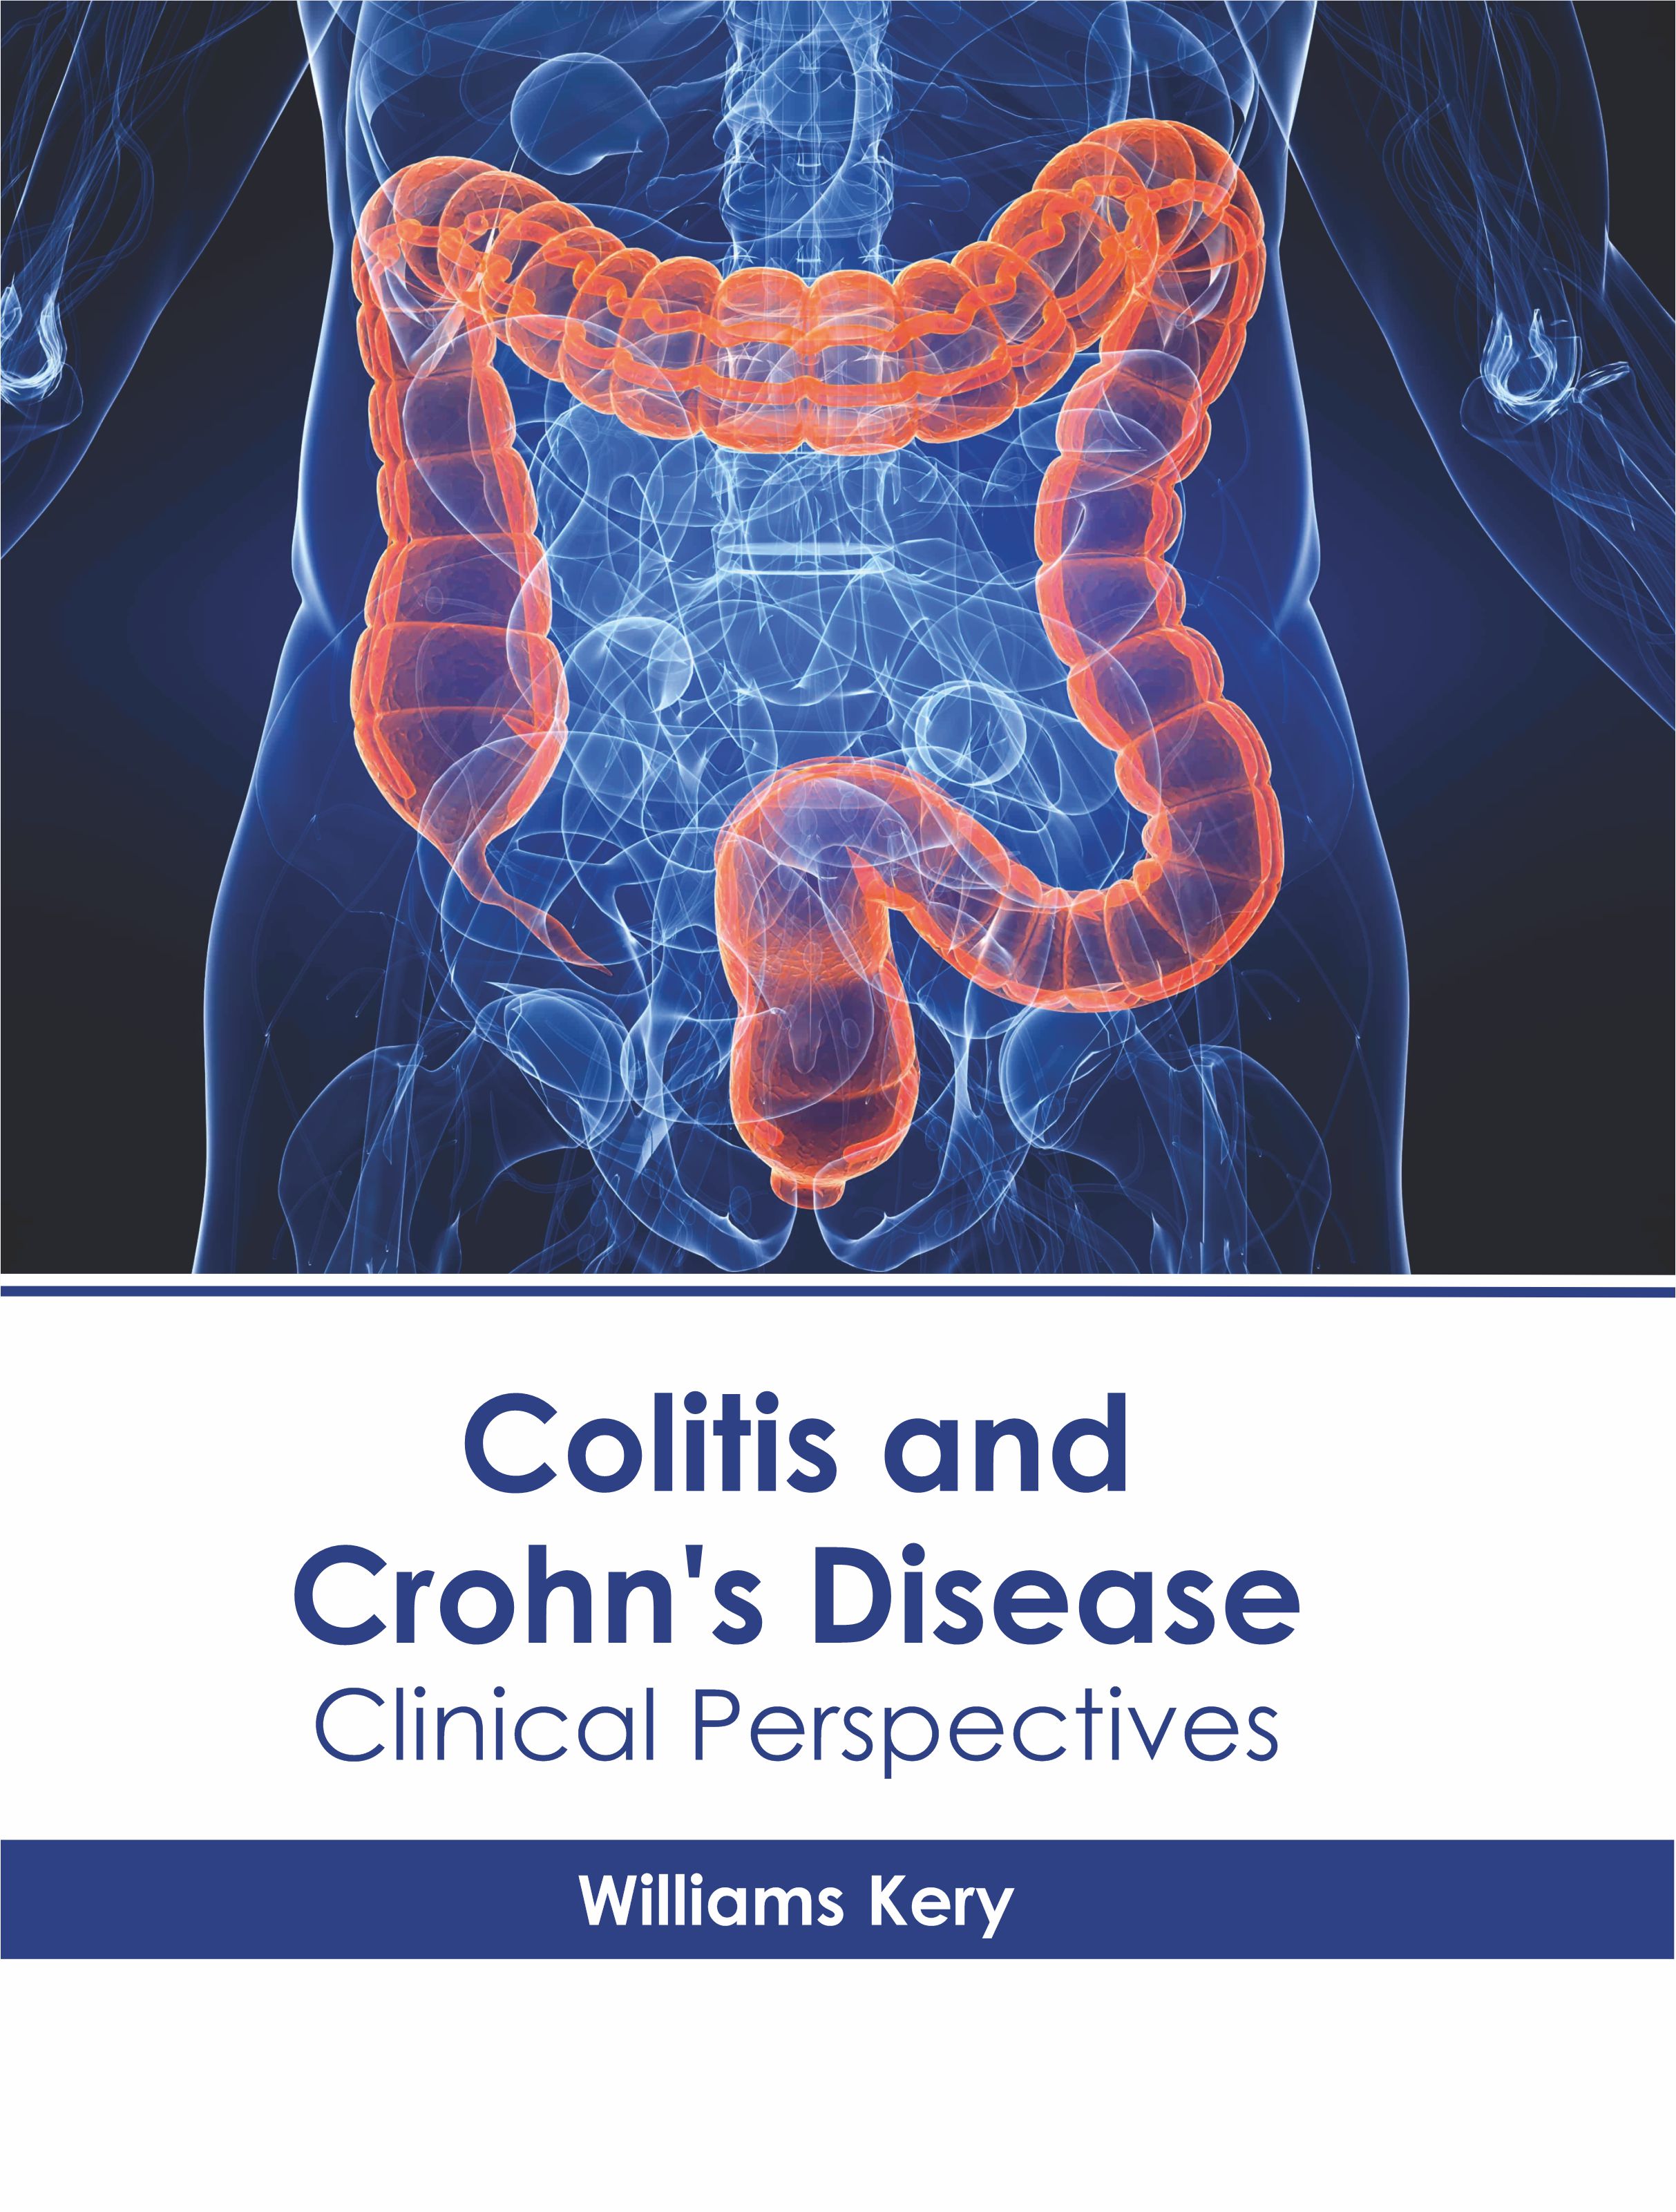 COLITIS AND CROHN'S DISEASE: CLINICAL PERSPECTIVES